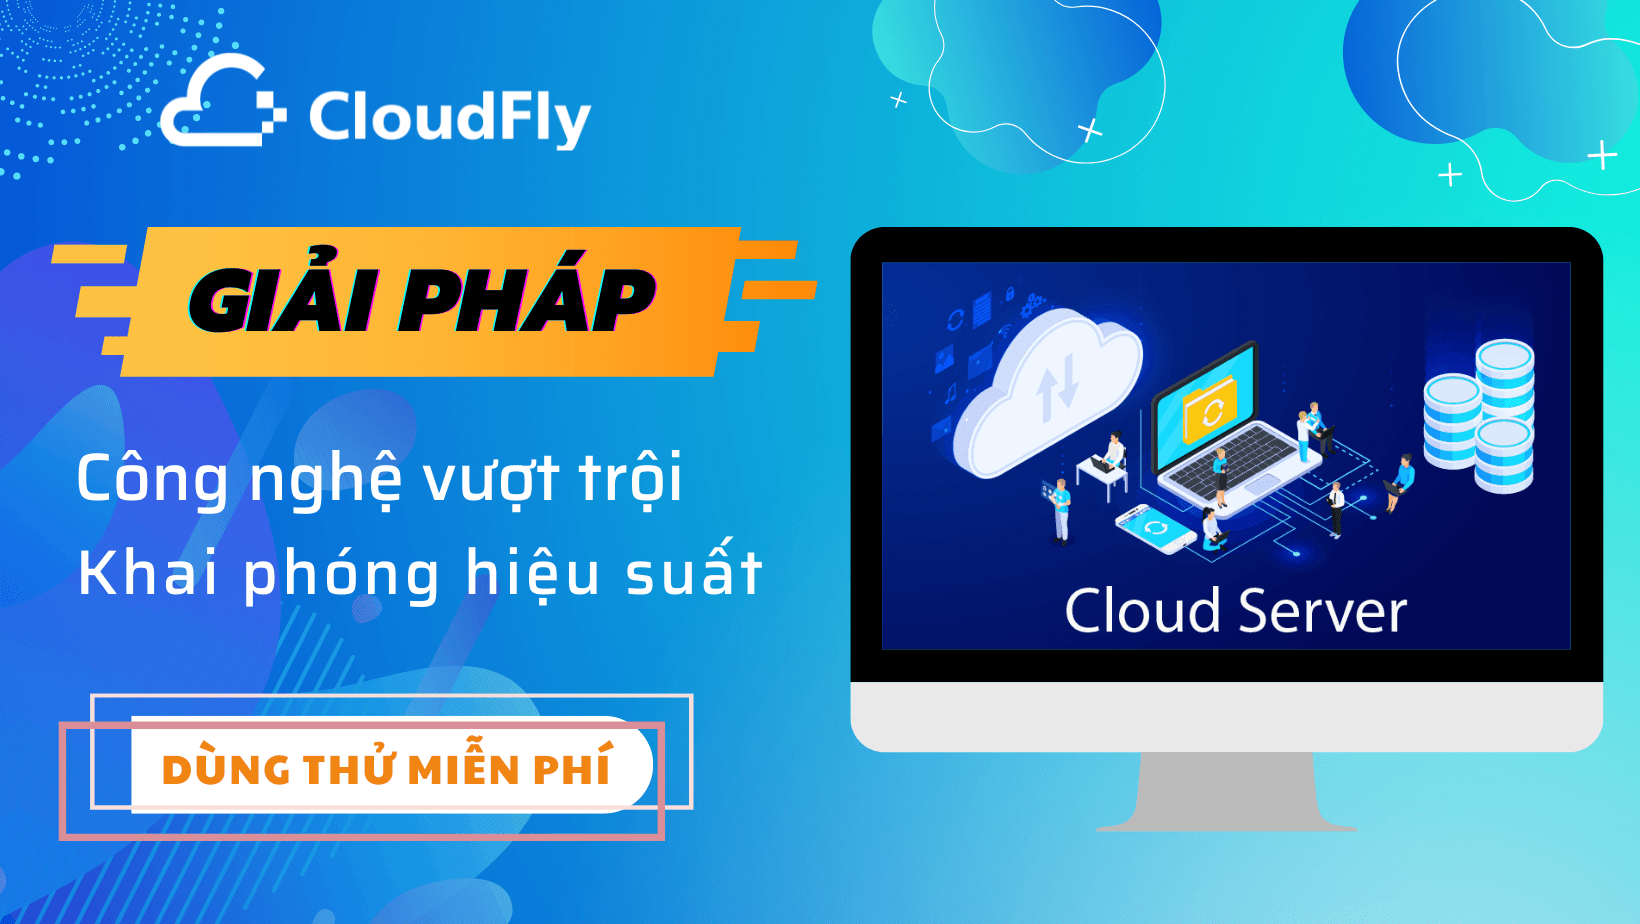 https://media.cloudfly.vn/posts/cai-dat-vps-vultr-1.png